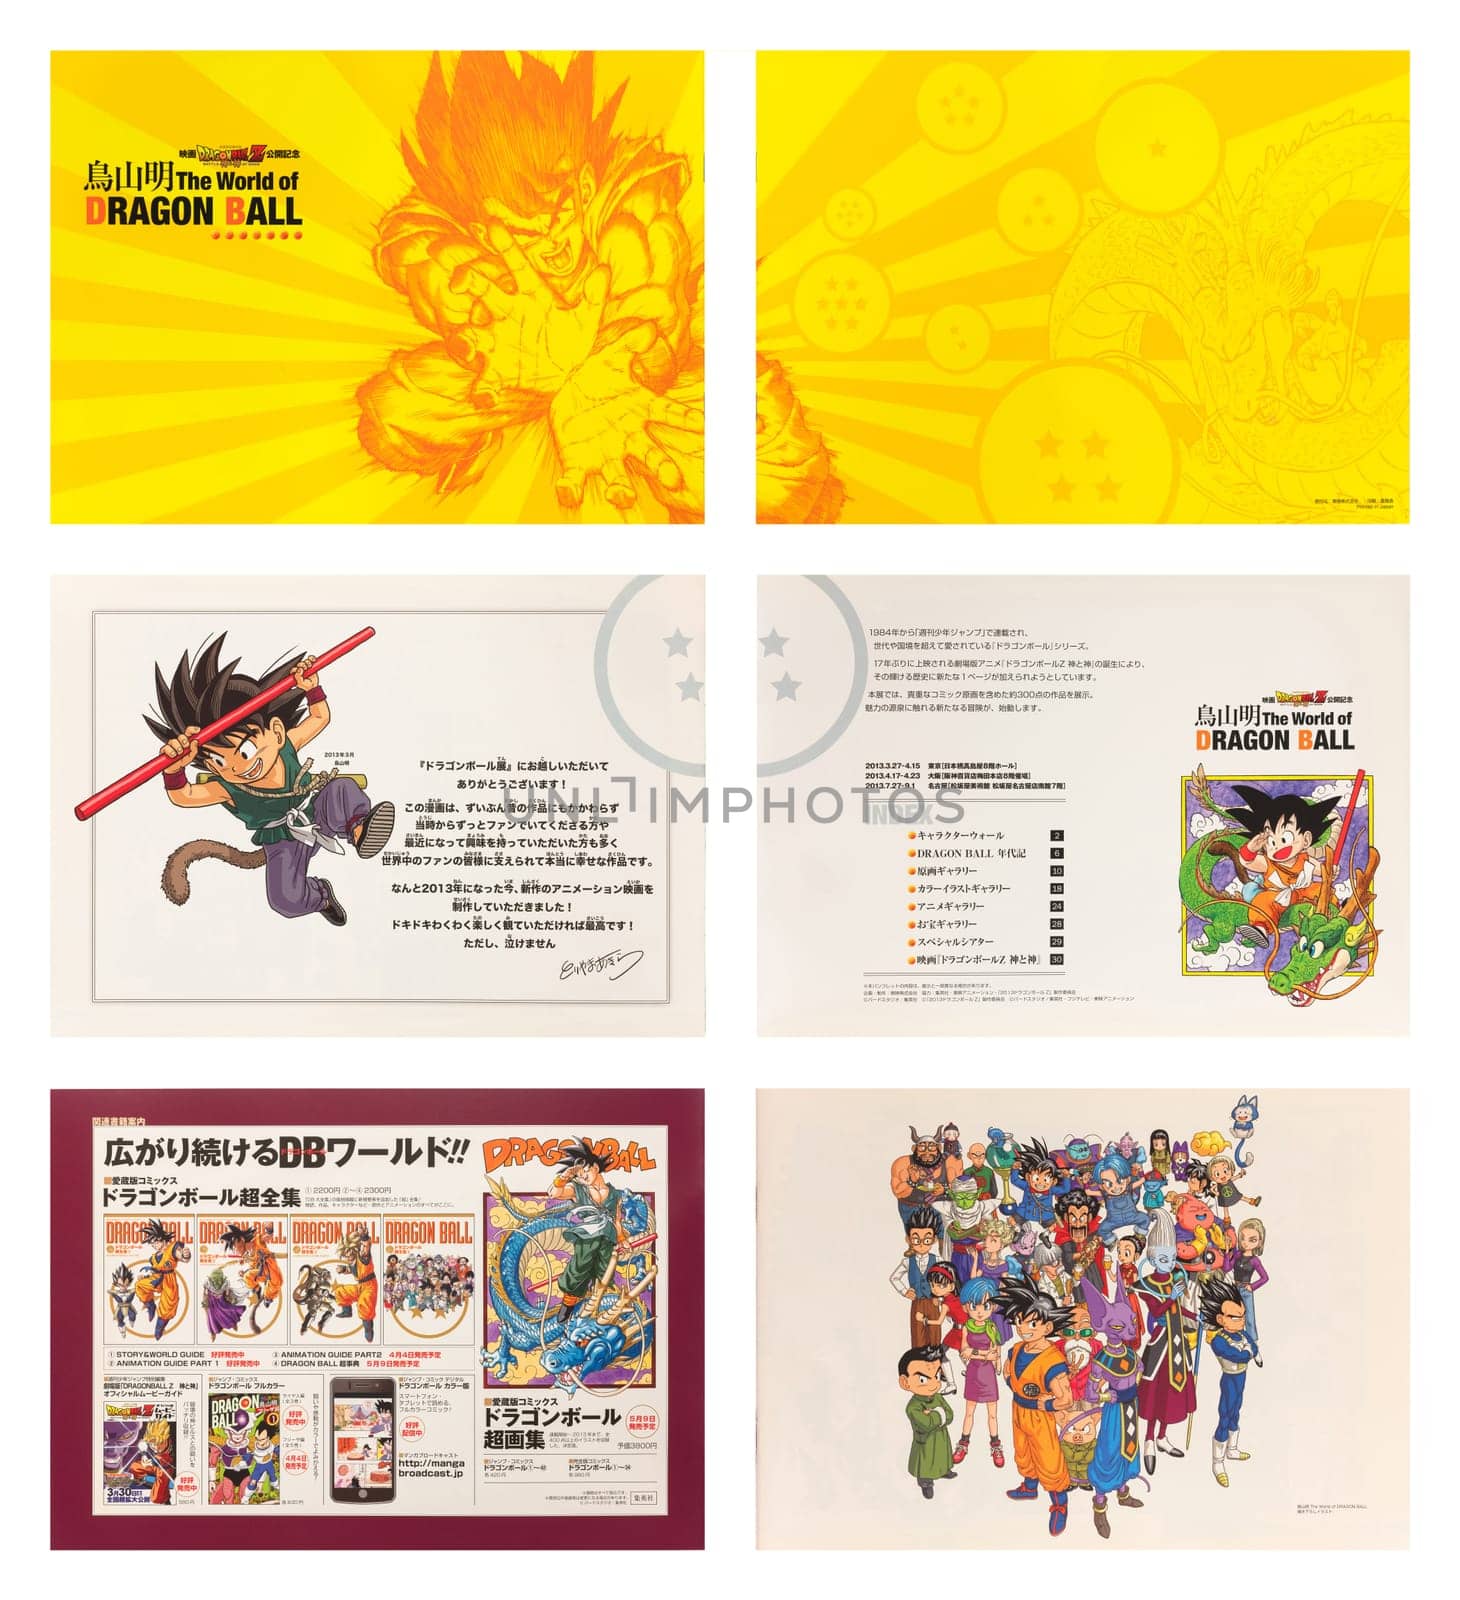 tokyo, japan - mar 27 2013: Cover, 1st and last pages of the pamphlet of the exhibition "Akira Toriyama The World of DRAGONBALL"  illustrated with the hero Son Goku making a kamehameha. (left: front)